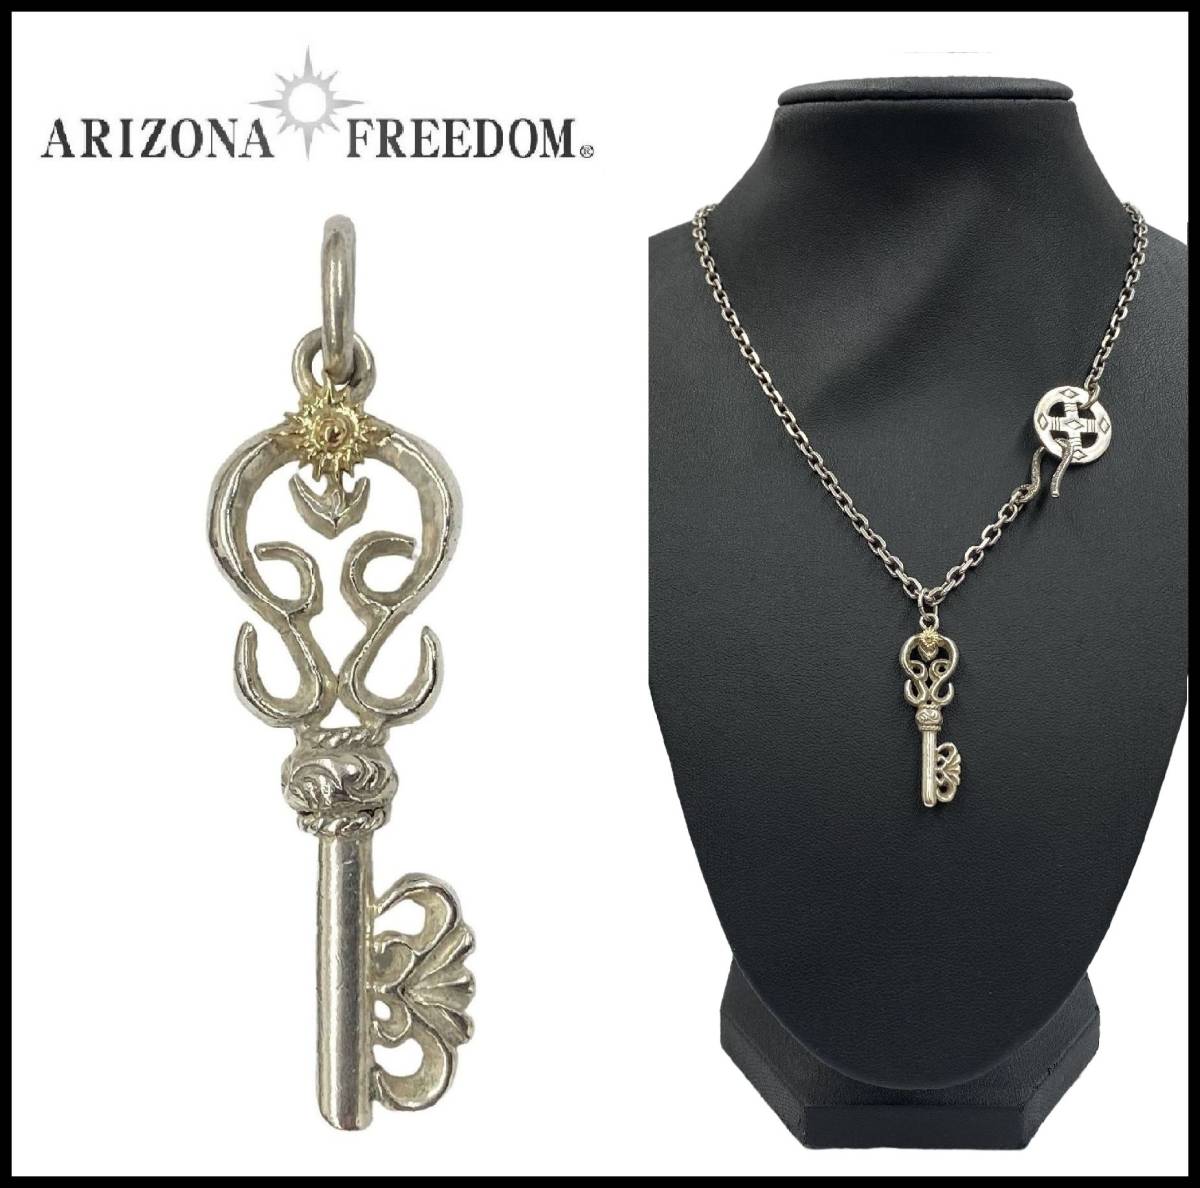 ARIZONA FREEDOM have zona freedom T-58a K18 sun god silver Tang . key key pendant top charm necklace Eagle feather 